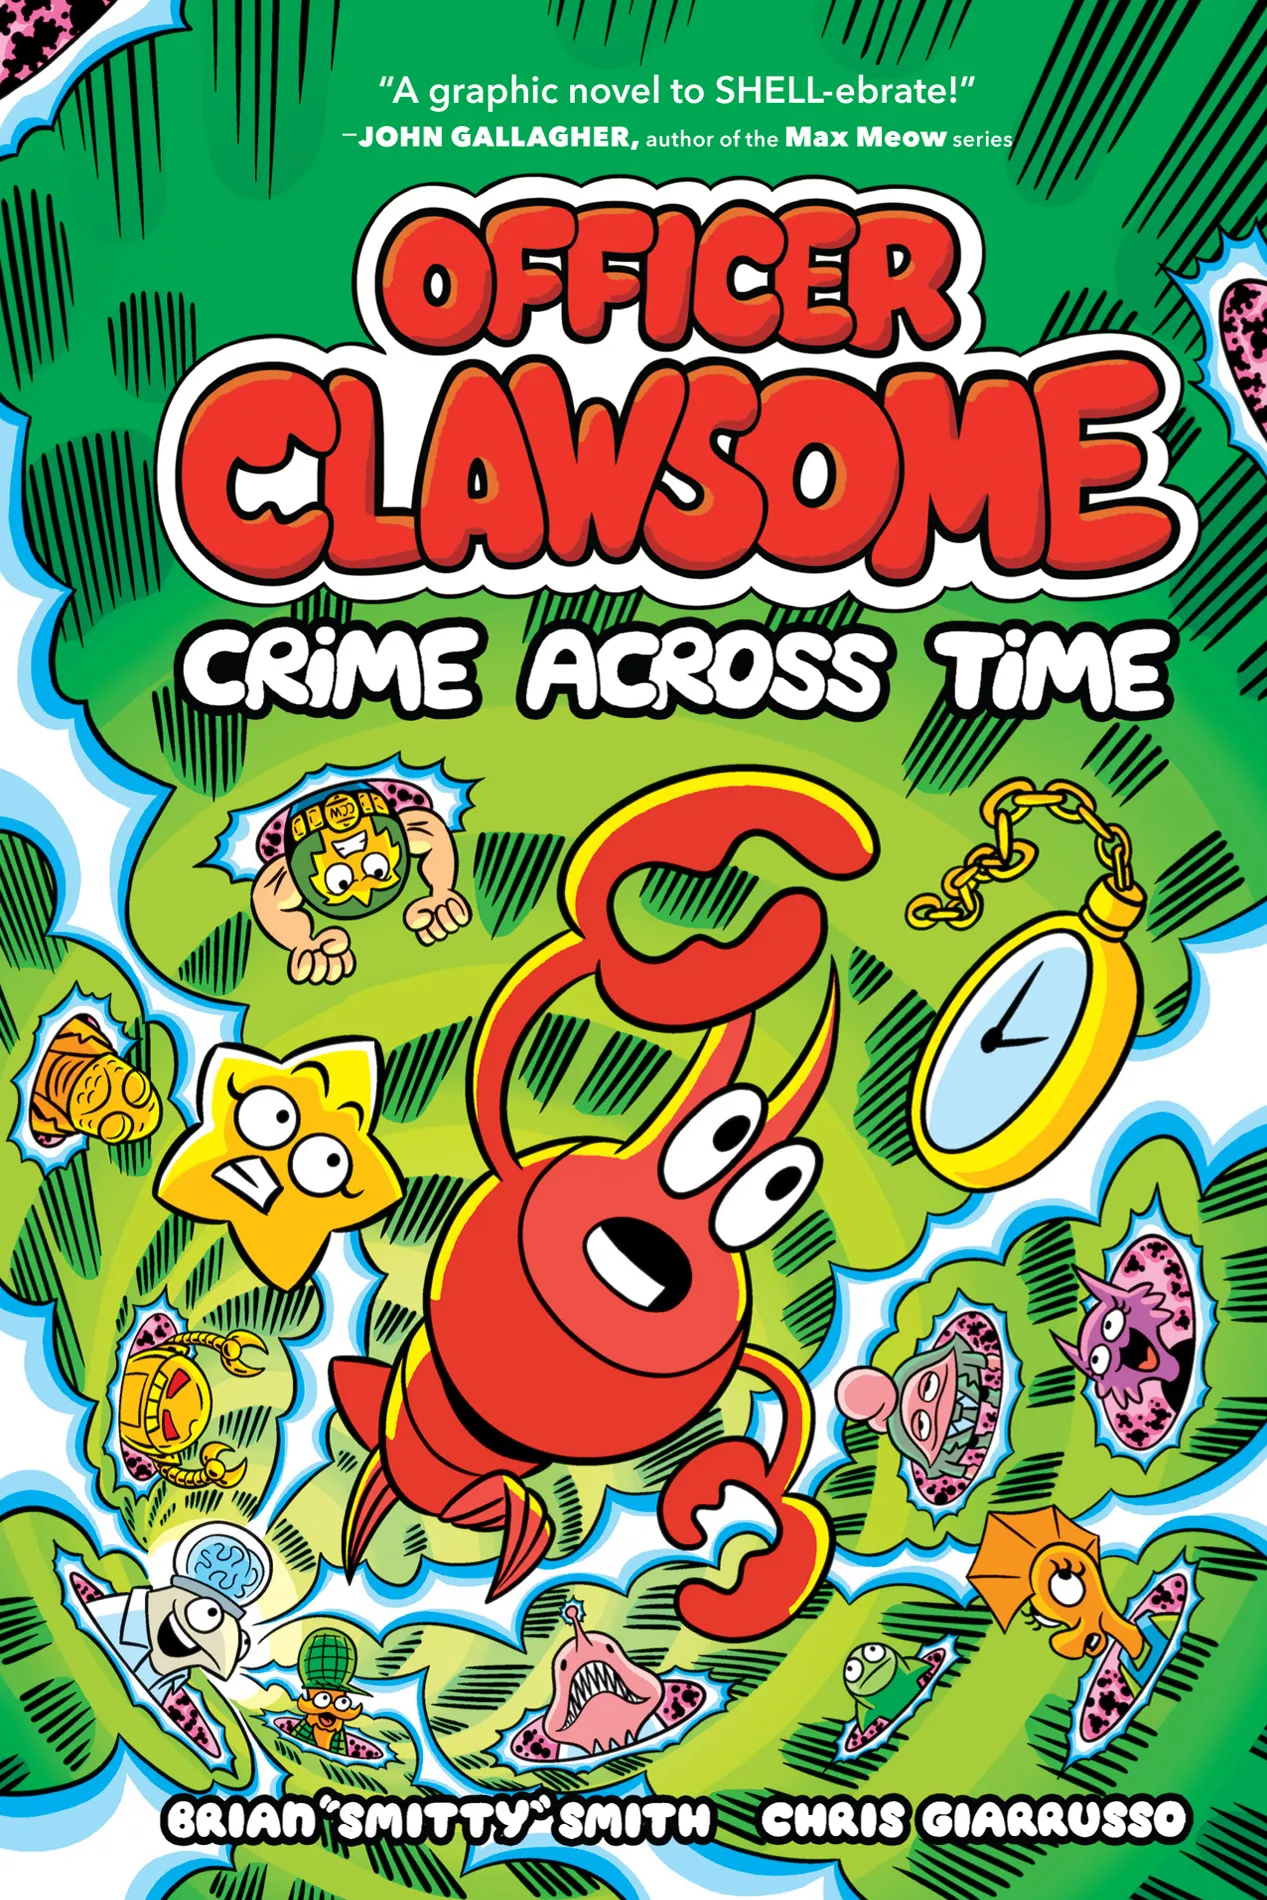 Crime Across Time (Officer Clawsome #2)